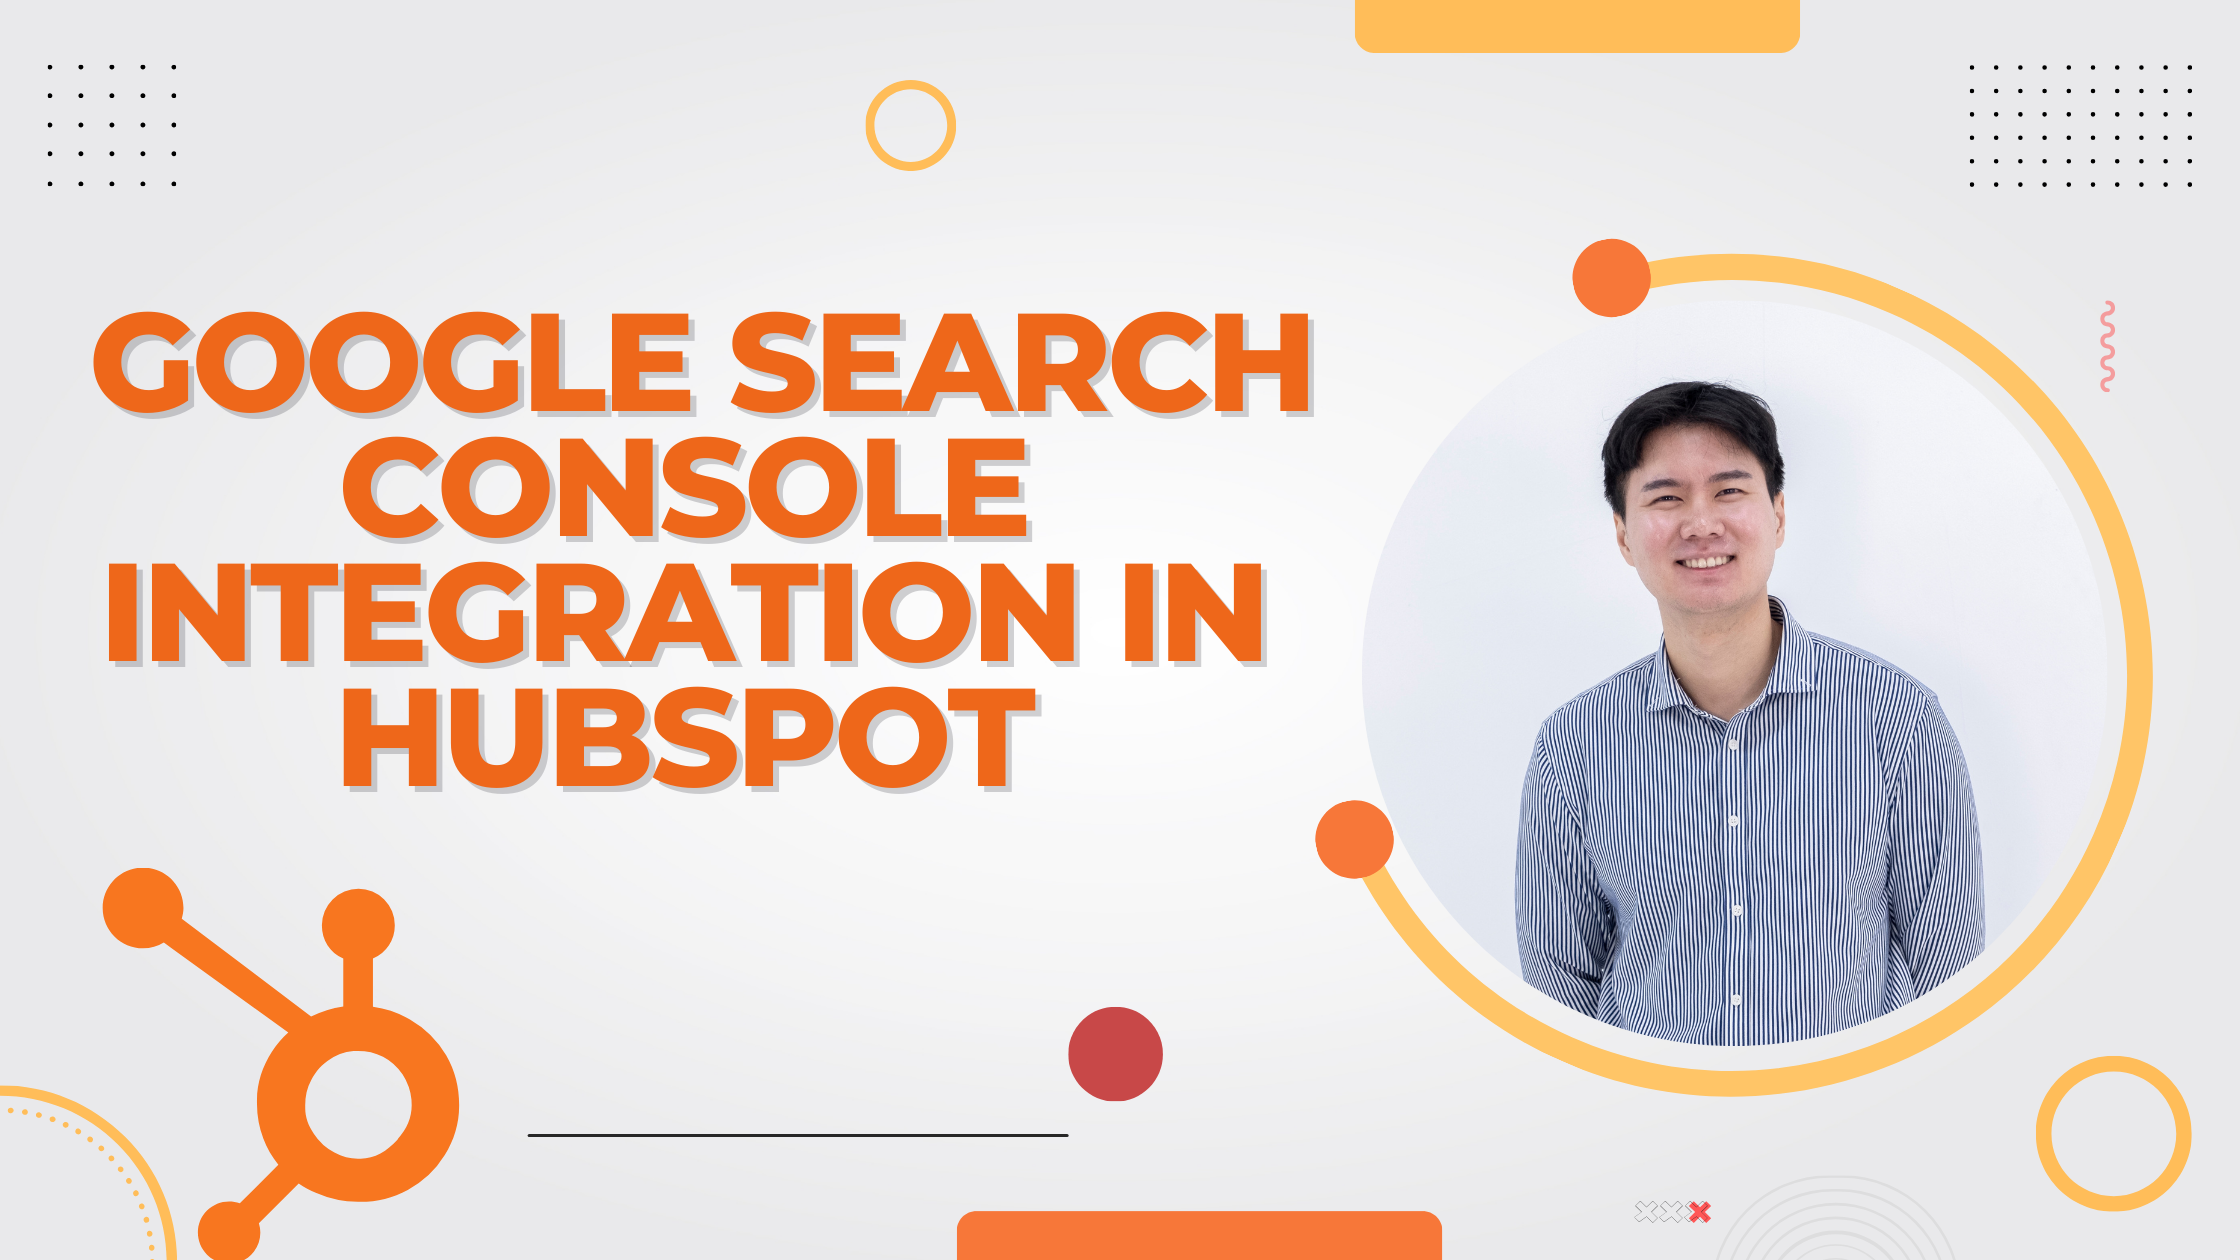 How to Enable the Google Search Console integration in HubSpot?